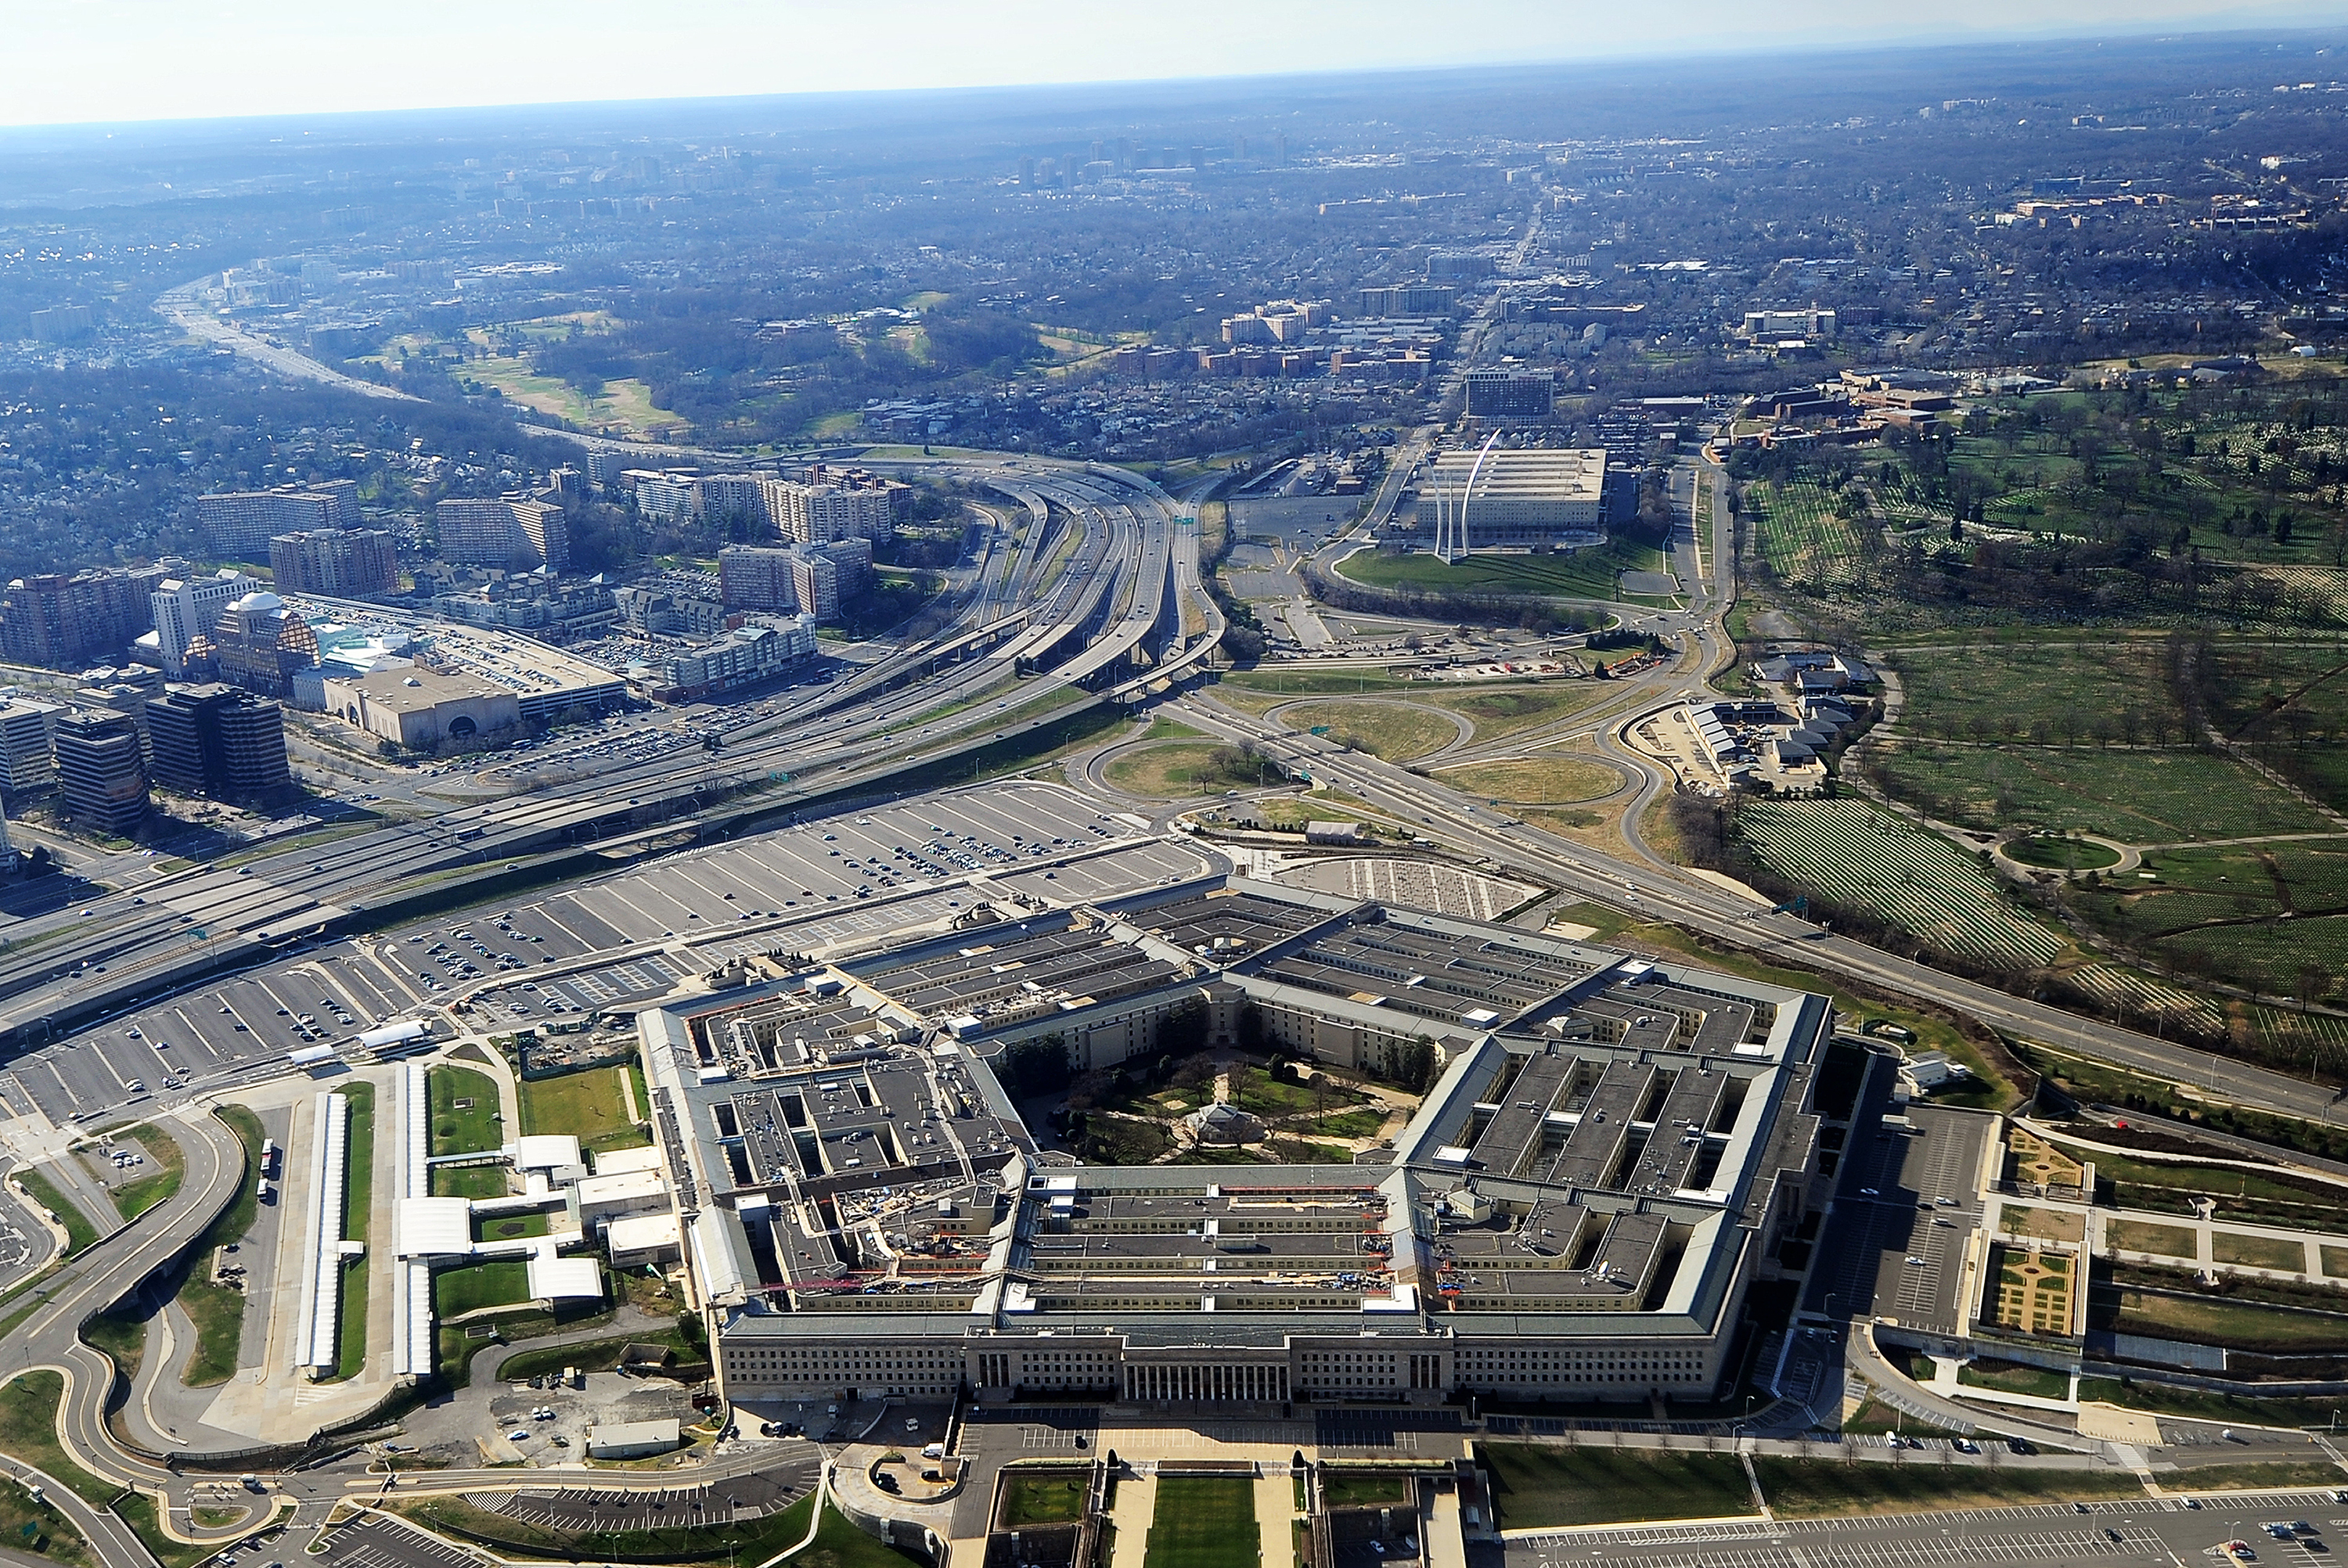 Pentagon was locked down  due to a "shooting event" that happened outside the building on a bus platform.